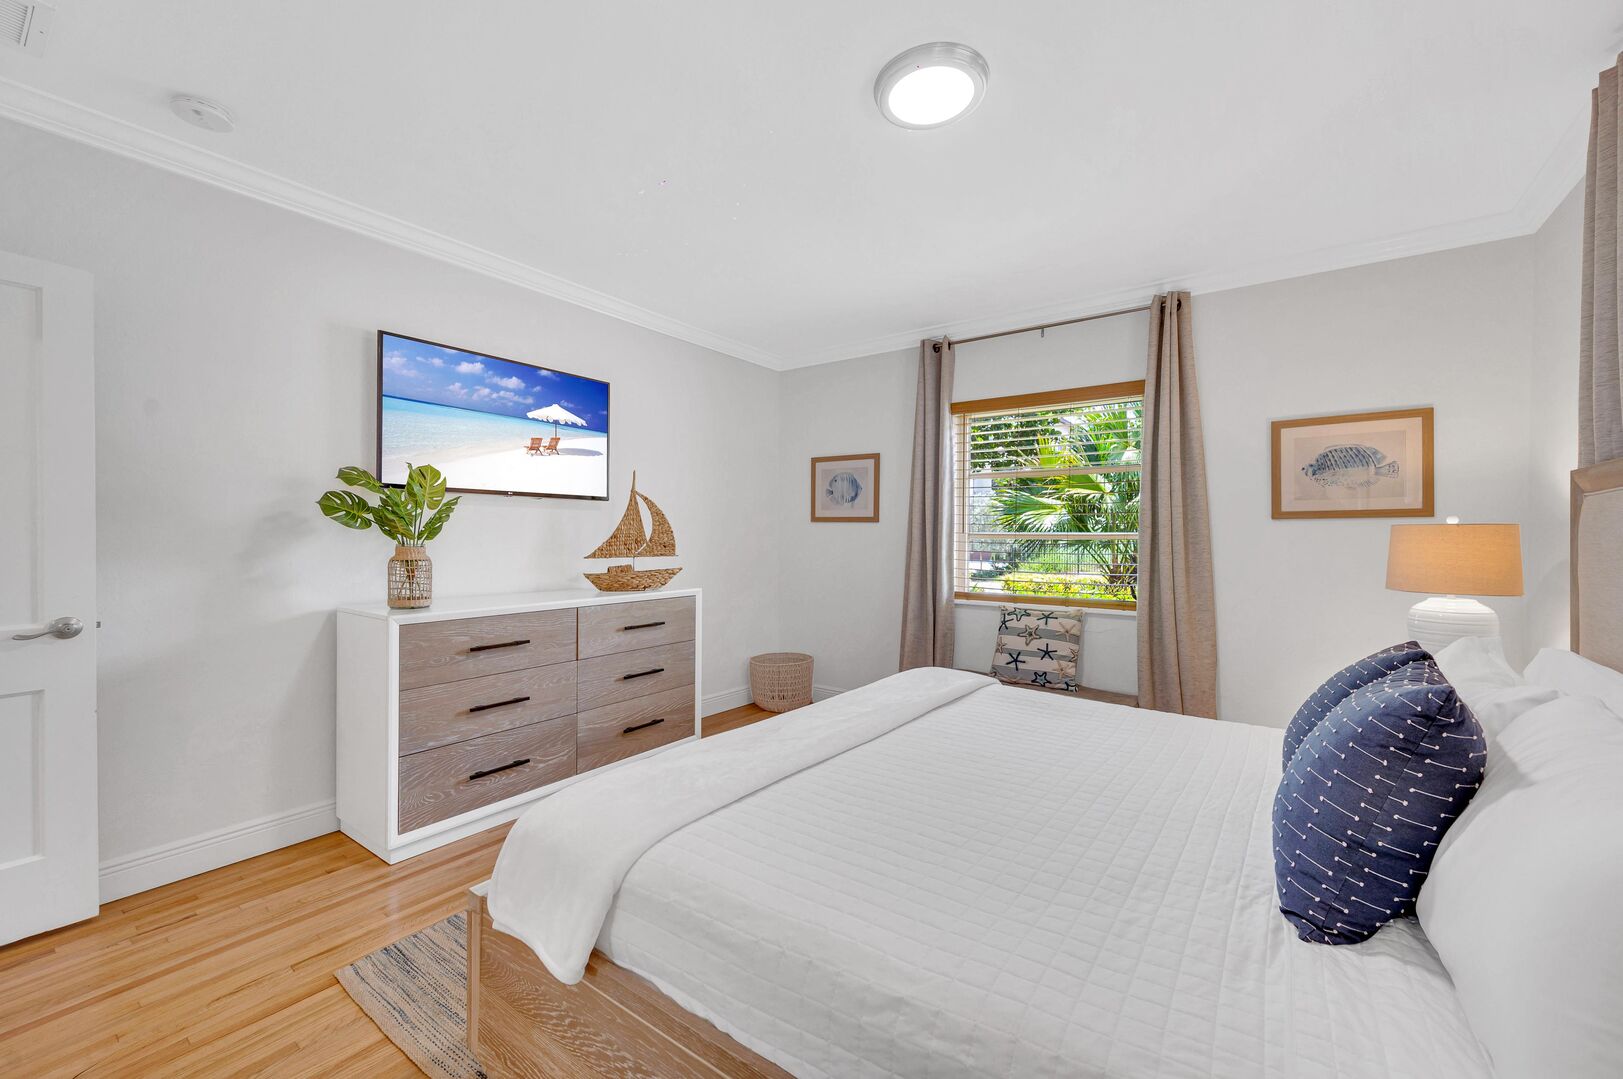 The master bedroom features a comfortable king-sized bed, a dresser, and a Smart TV.